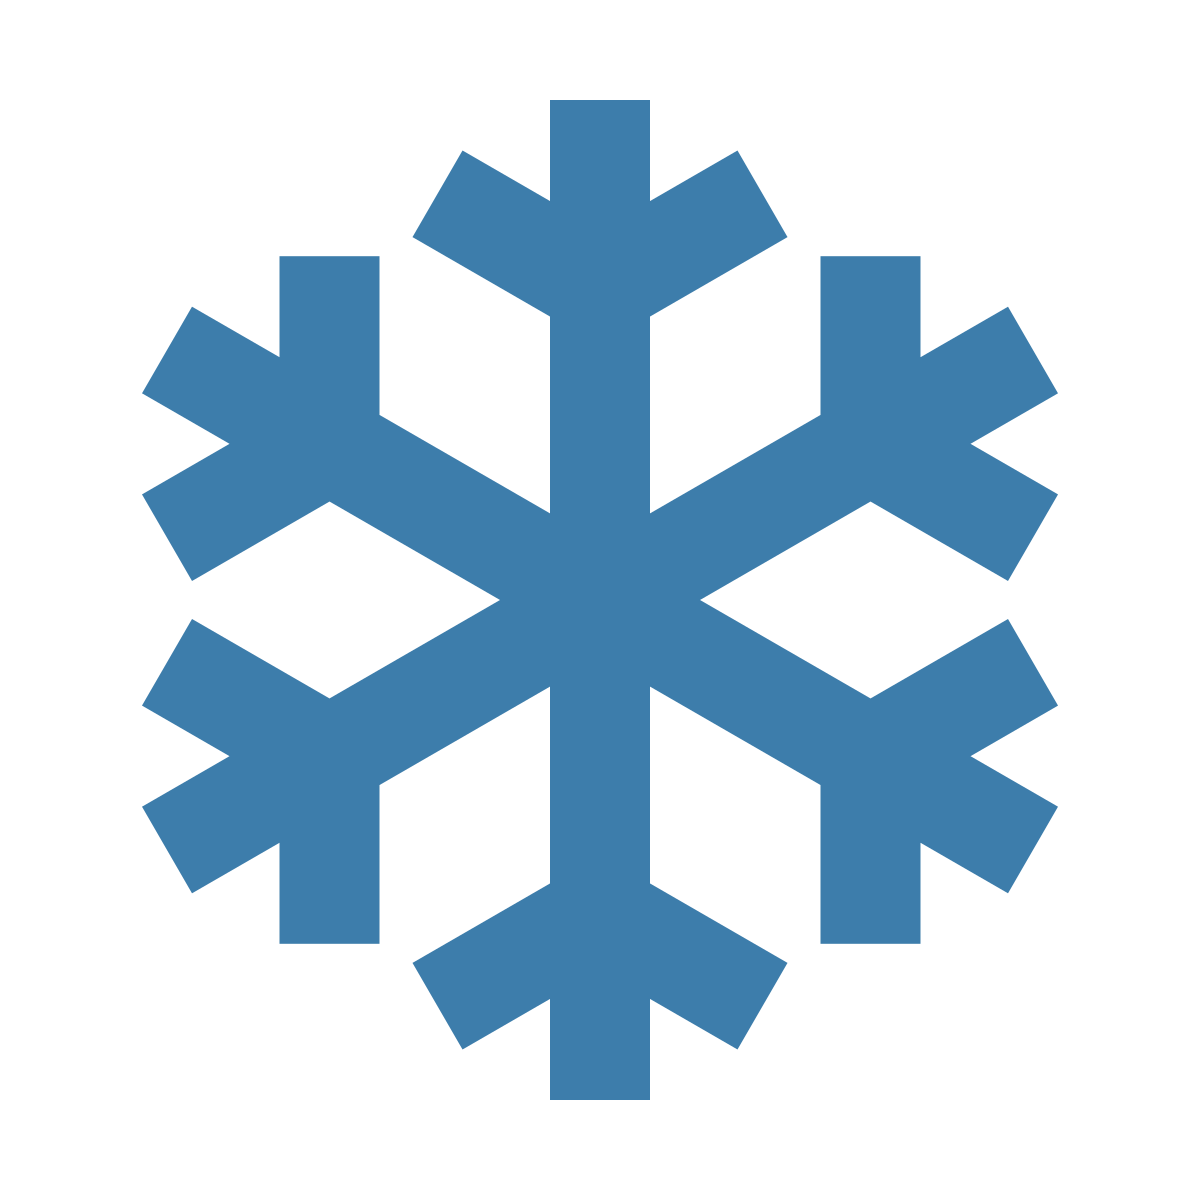 Download File:Snow flake.svg - Wikimedia Commons